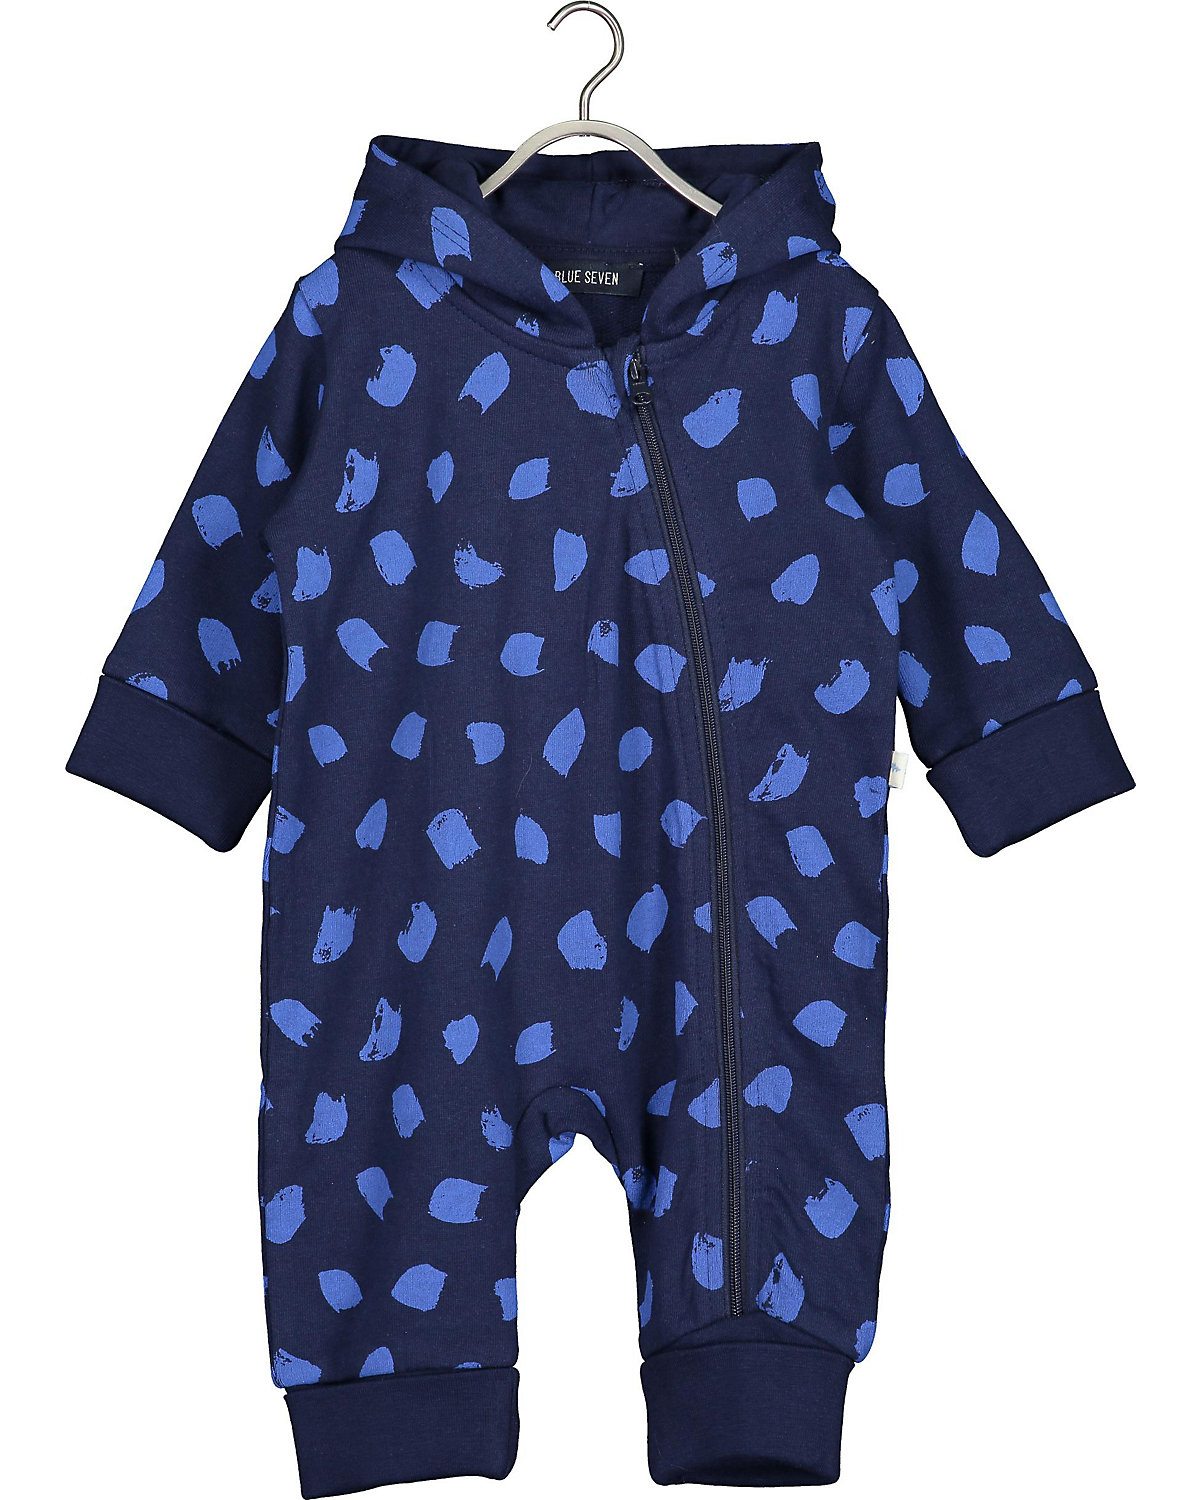 BLUE SEVEN Baby Overall